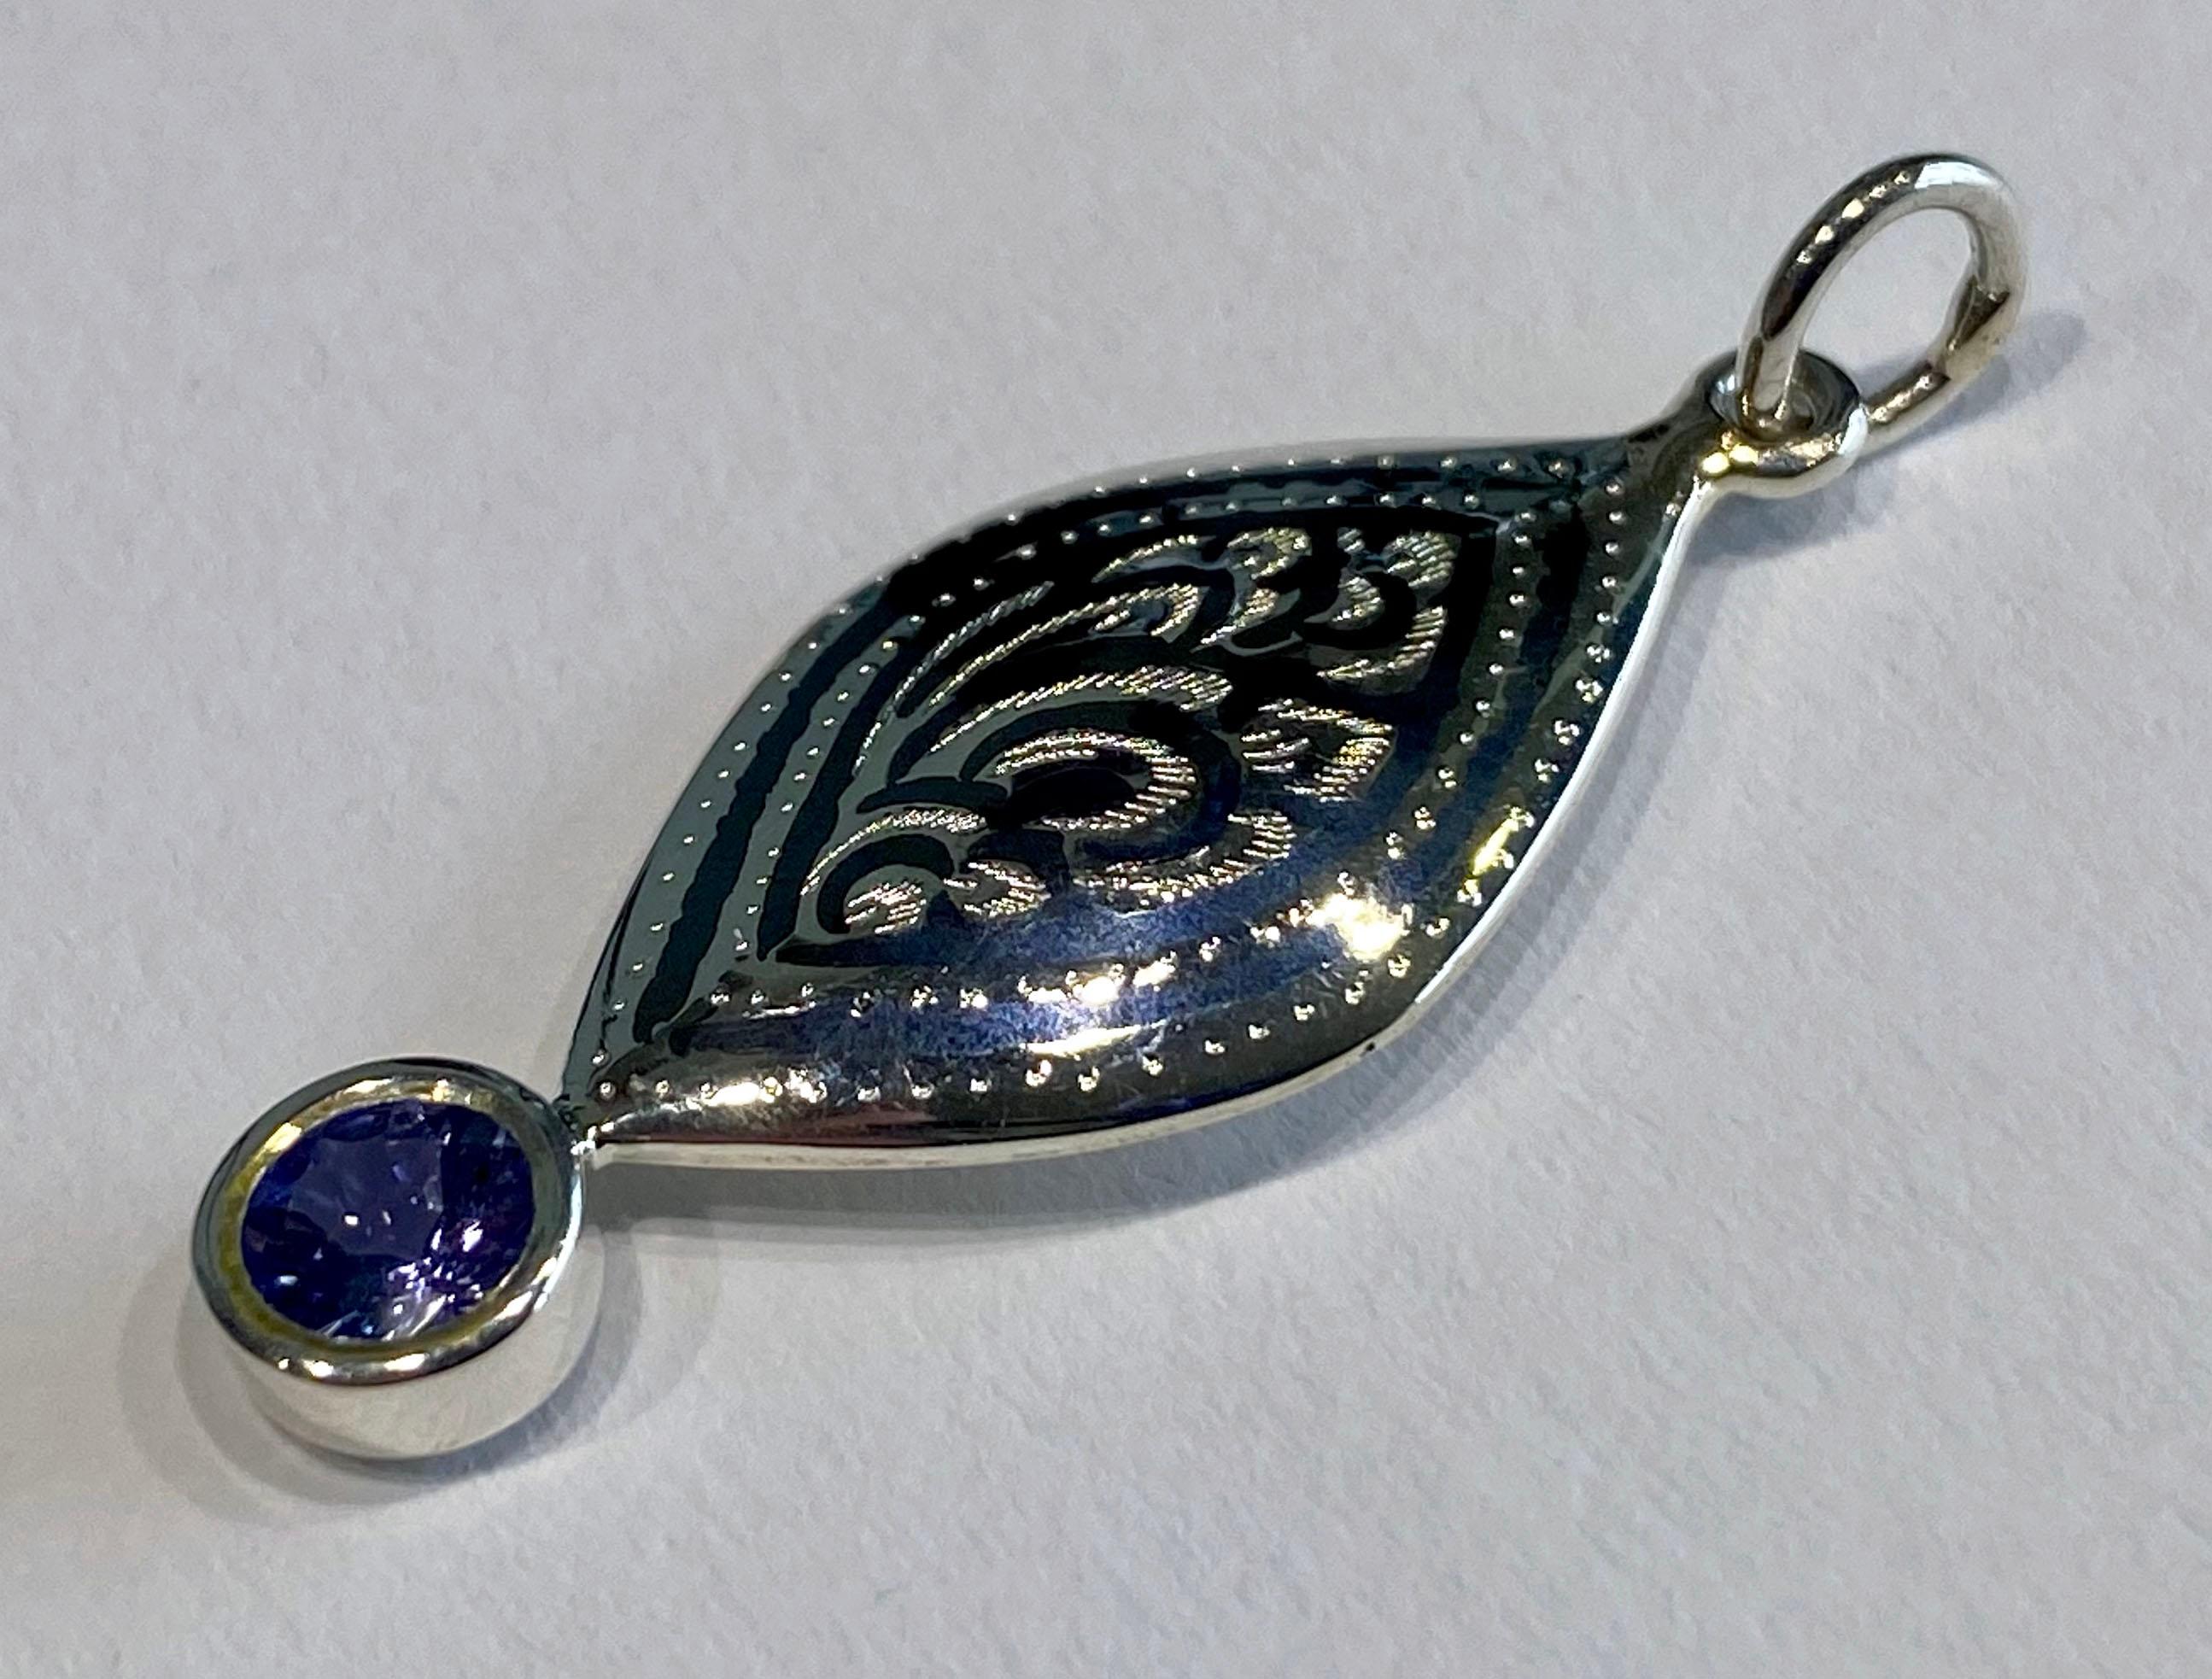 A Silver Filagree Pendant set with a Tanzanite. The style of Silver craft is called Nielloware that comes from Southern Thailand. This is a one of a kind pendant accented with a 5 MM Round Blue Tanzanite. The pendant hangs from an 18 inch silver